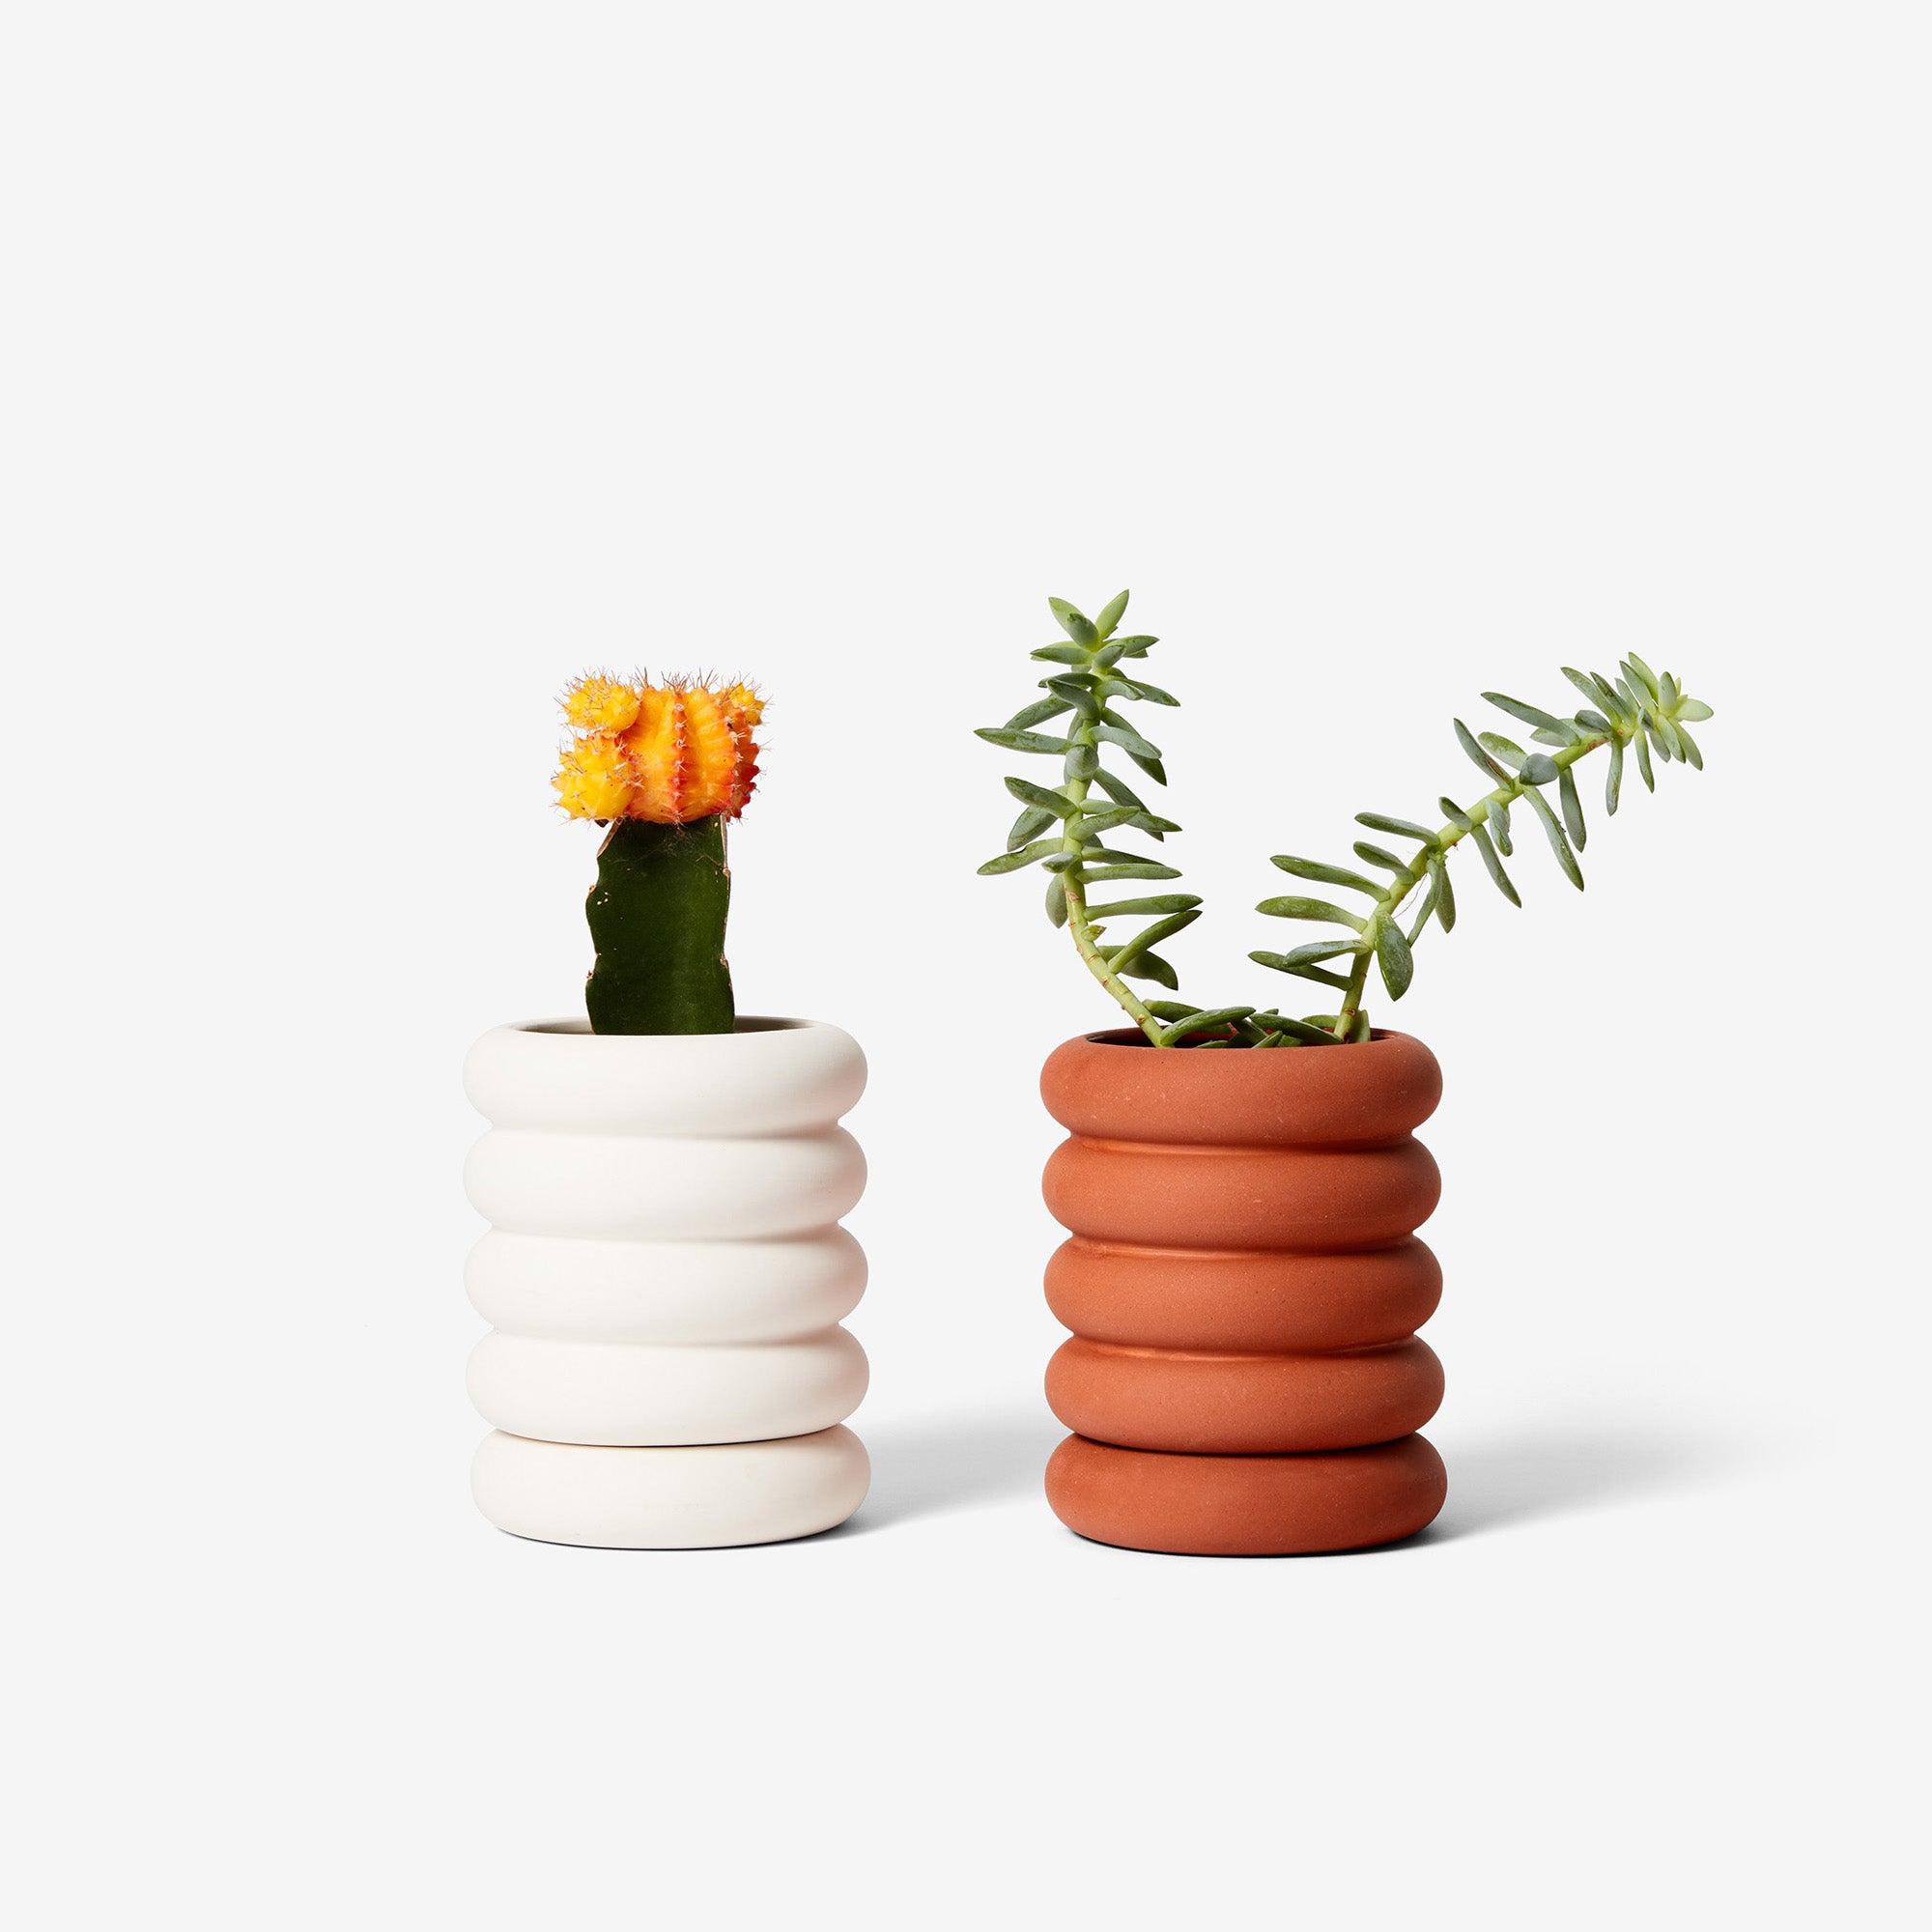 Stacking Planter with tiered volumes conceals built-in water saucer